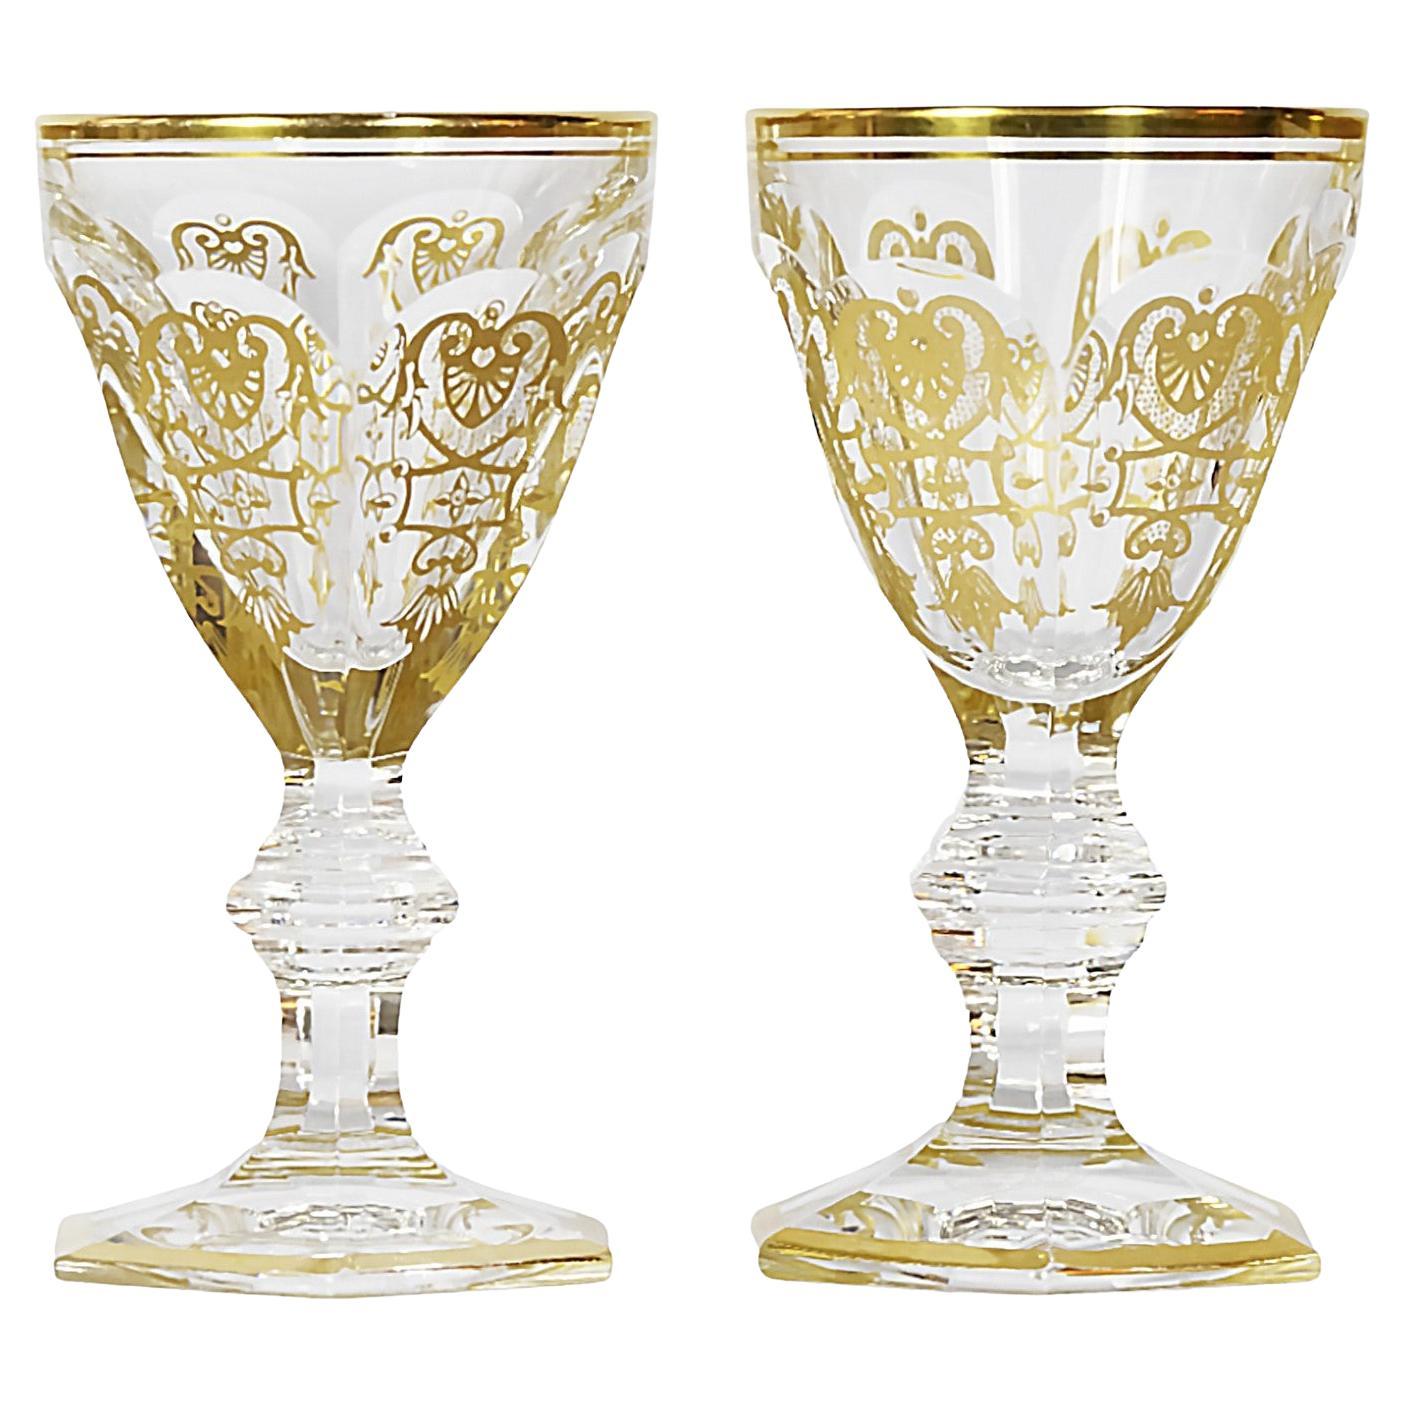 2 Pcs. Set of Baccarat Harcourt Empire Collection Crystal Glasses